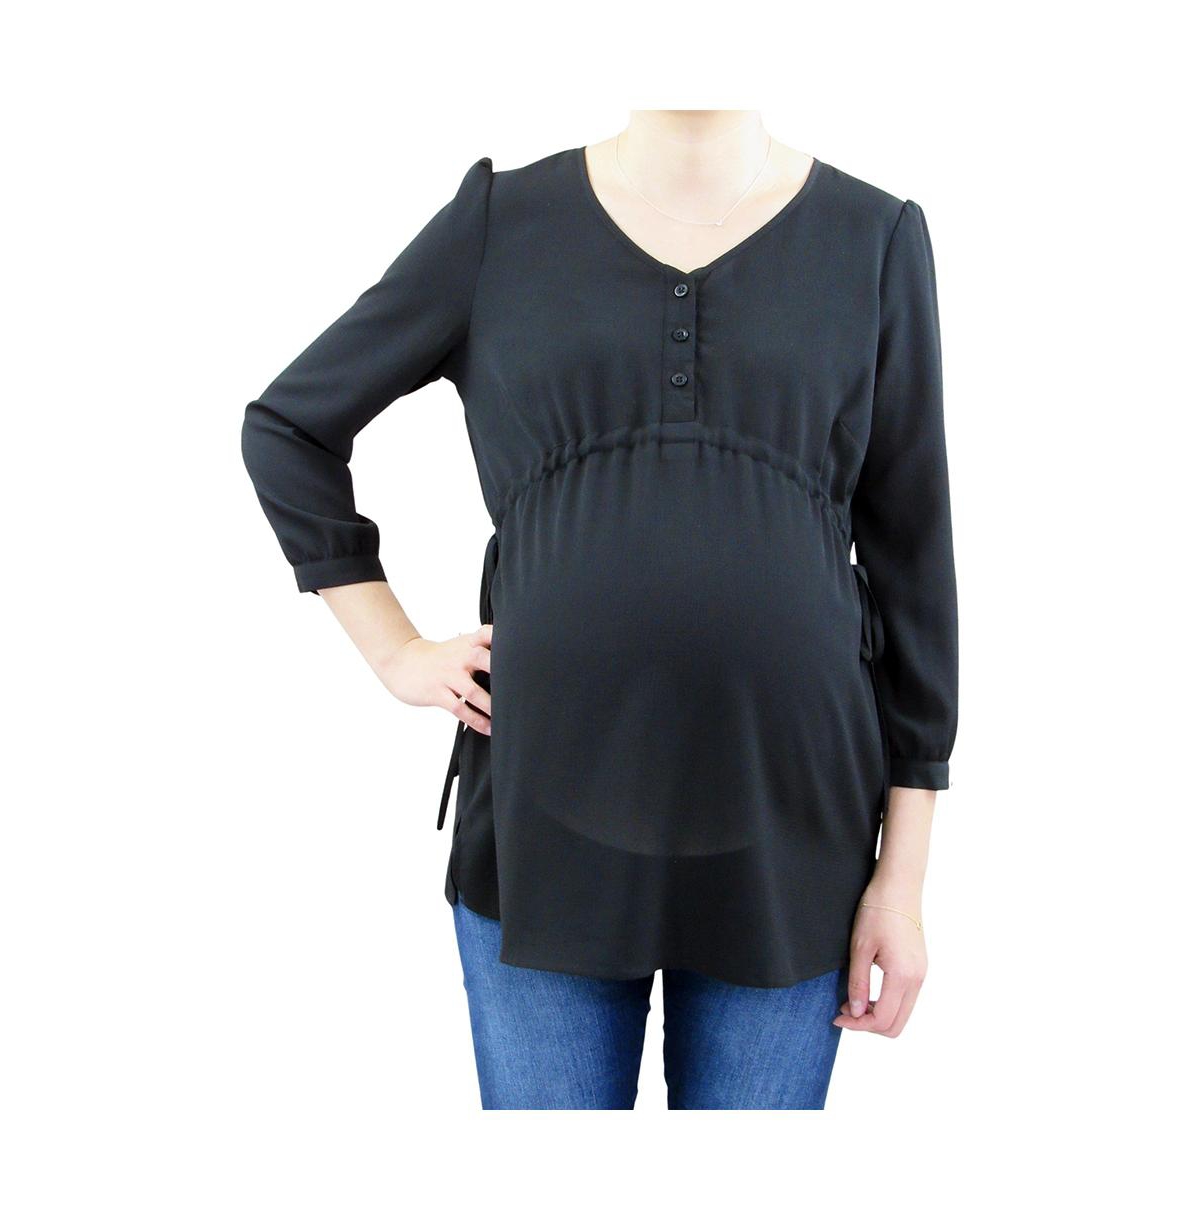 Maternity 3/4 Sleeve Button Front Babydoll Top - Black